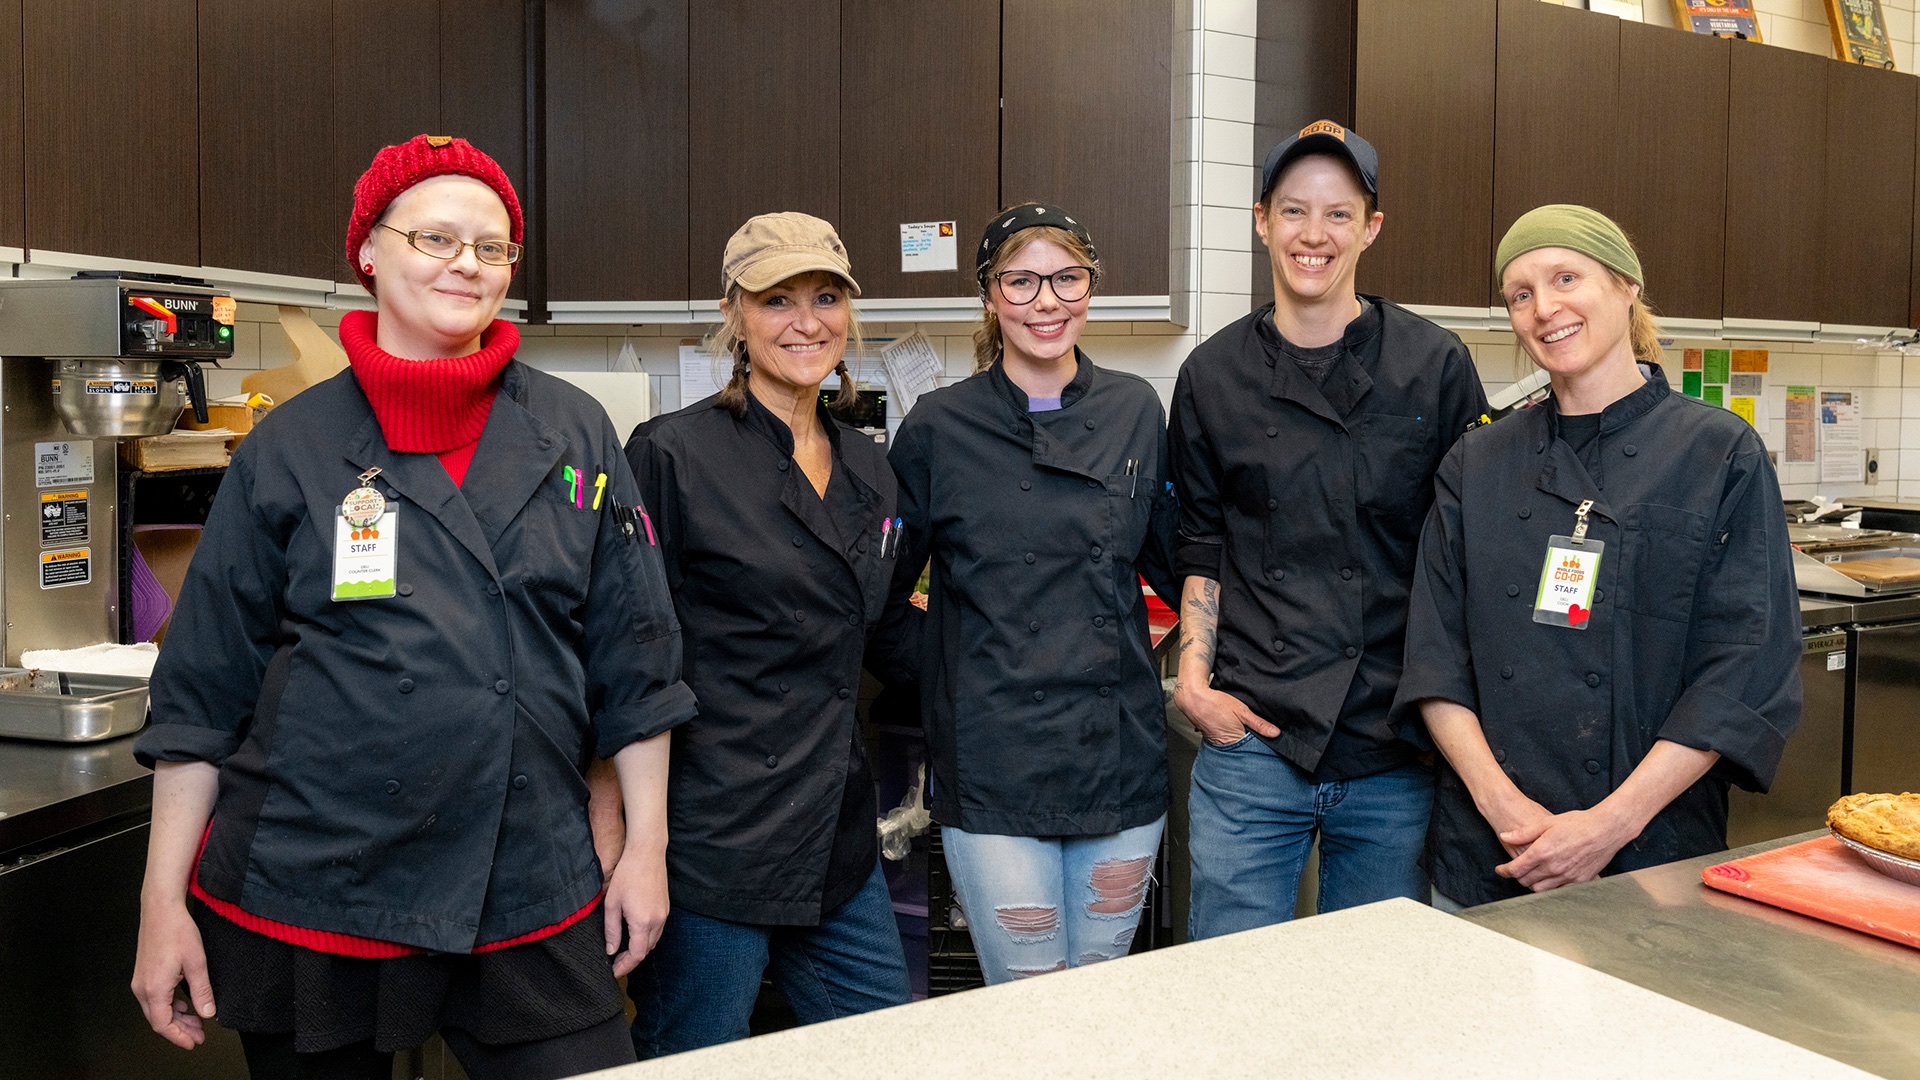 Five people wearing black chef uniforms and different colored hats stand together in a kitchen. They are smiling and standing in a relaxed, casual manner. Various kitchen equipment and utensils can be seen in the background.